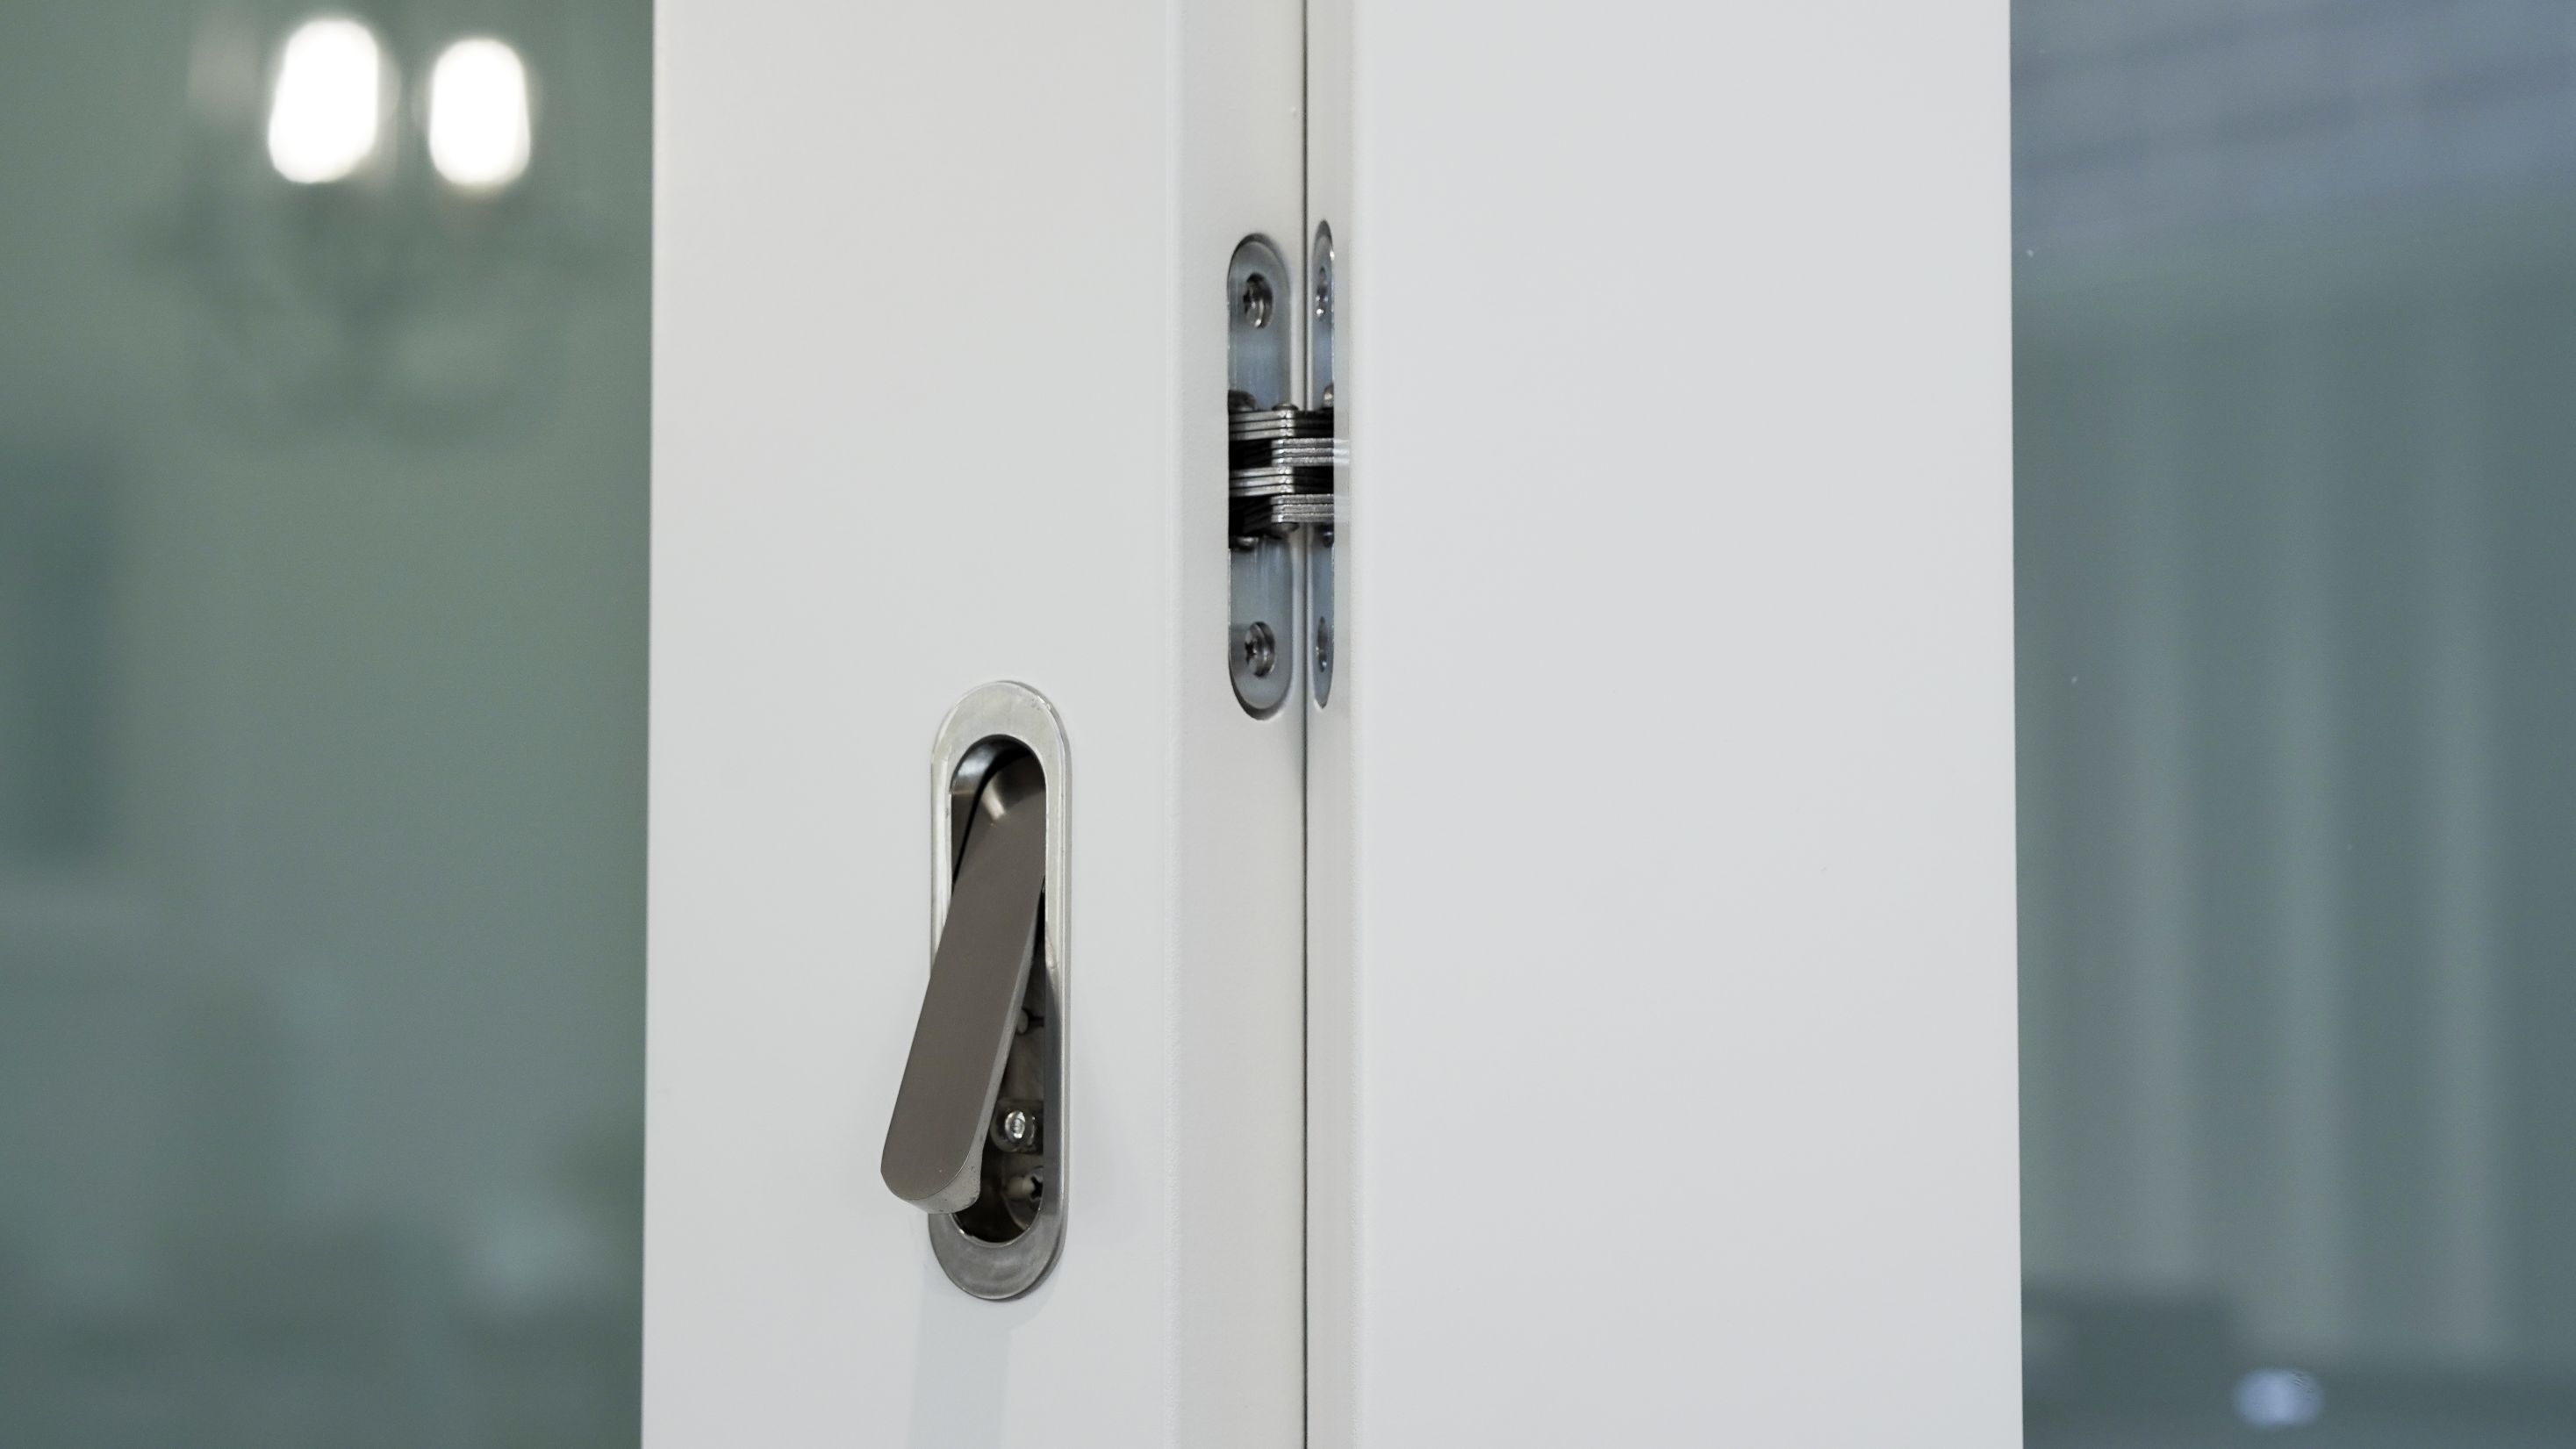 Pull handle with chrome finish on white door with translucent glass